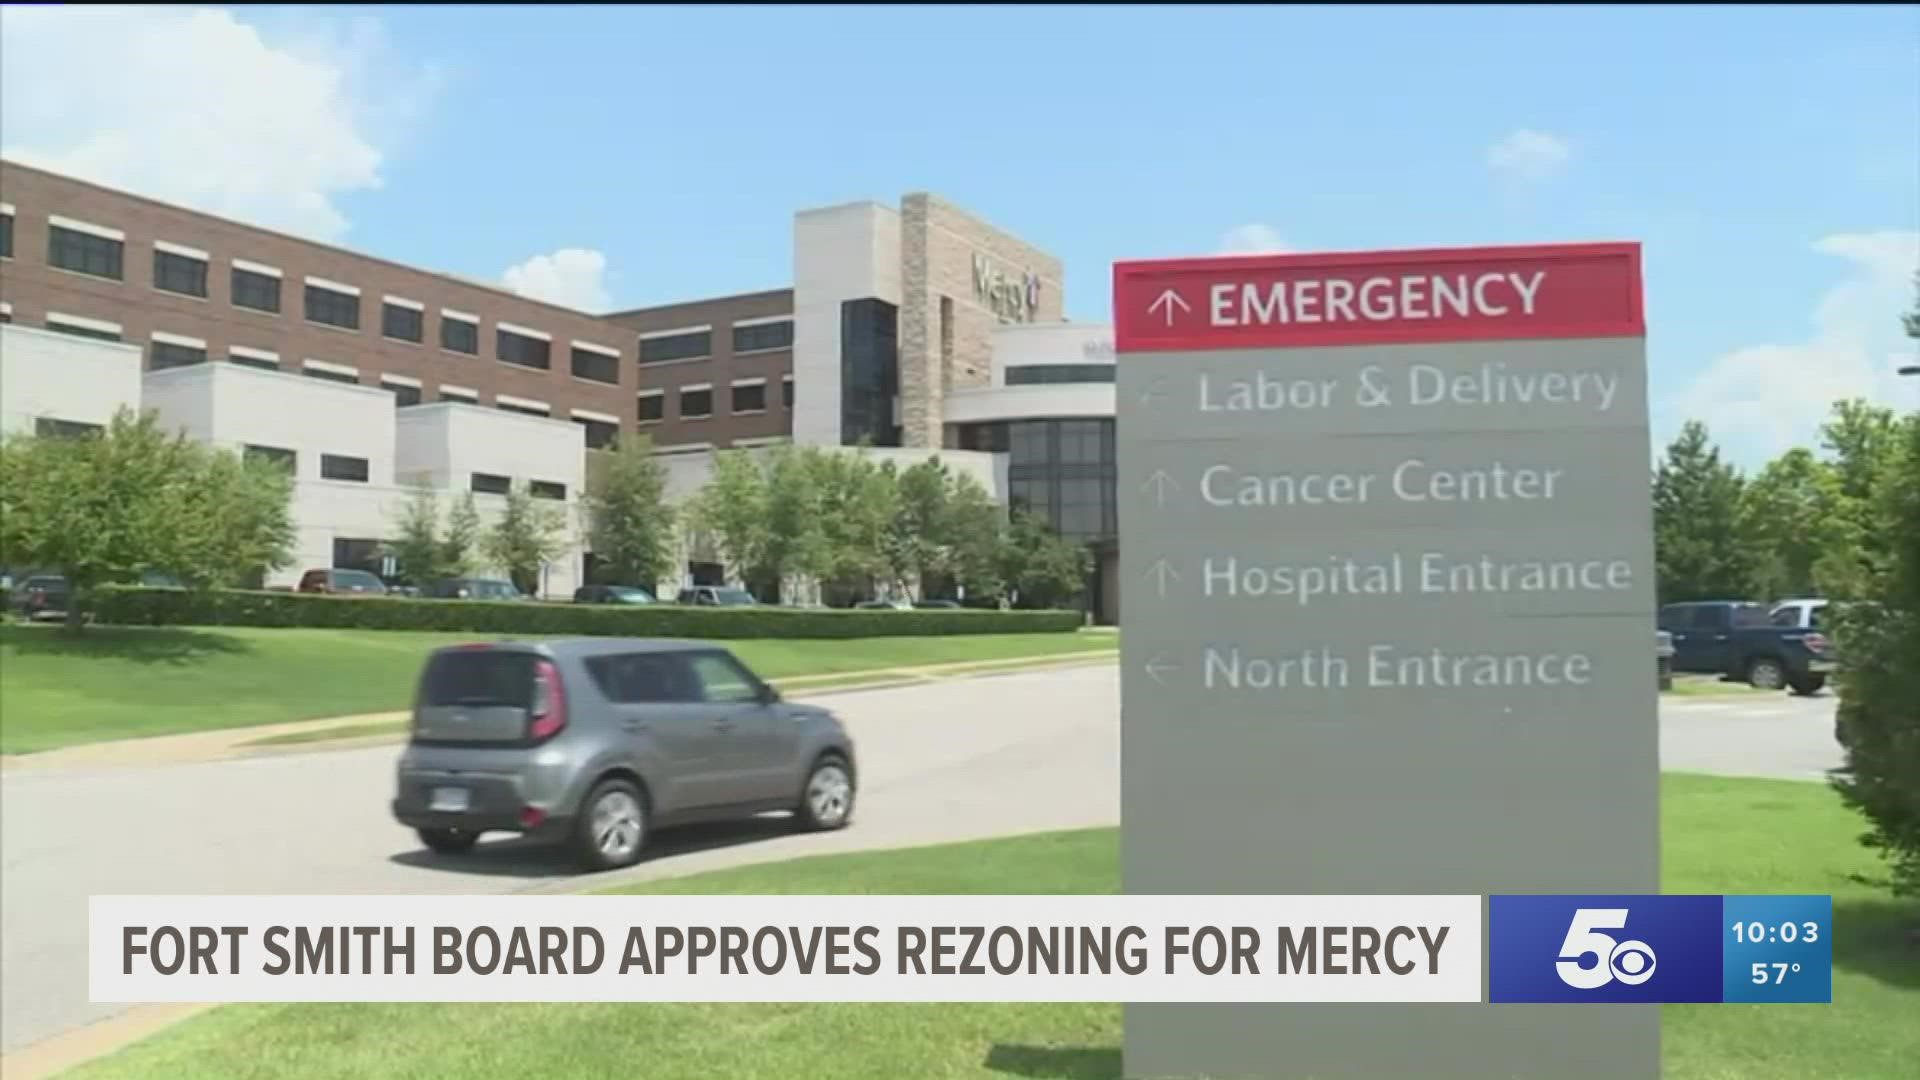 Fort Smith Board approves rezoning for Mercy work, OKs cyber security analyst